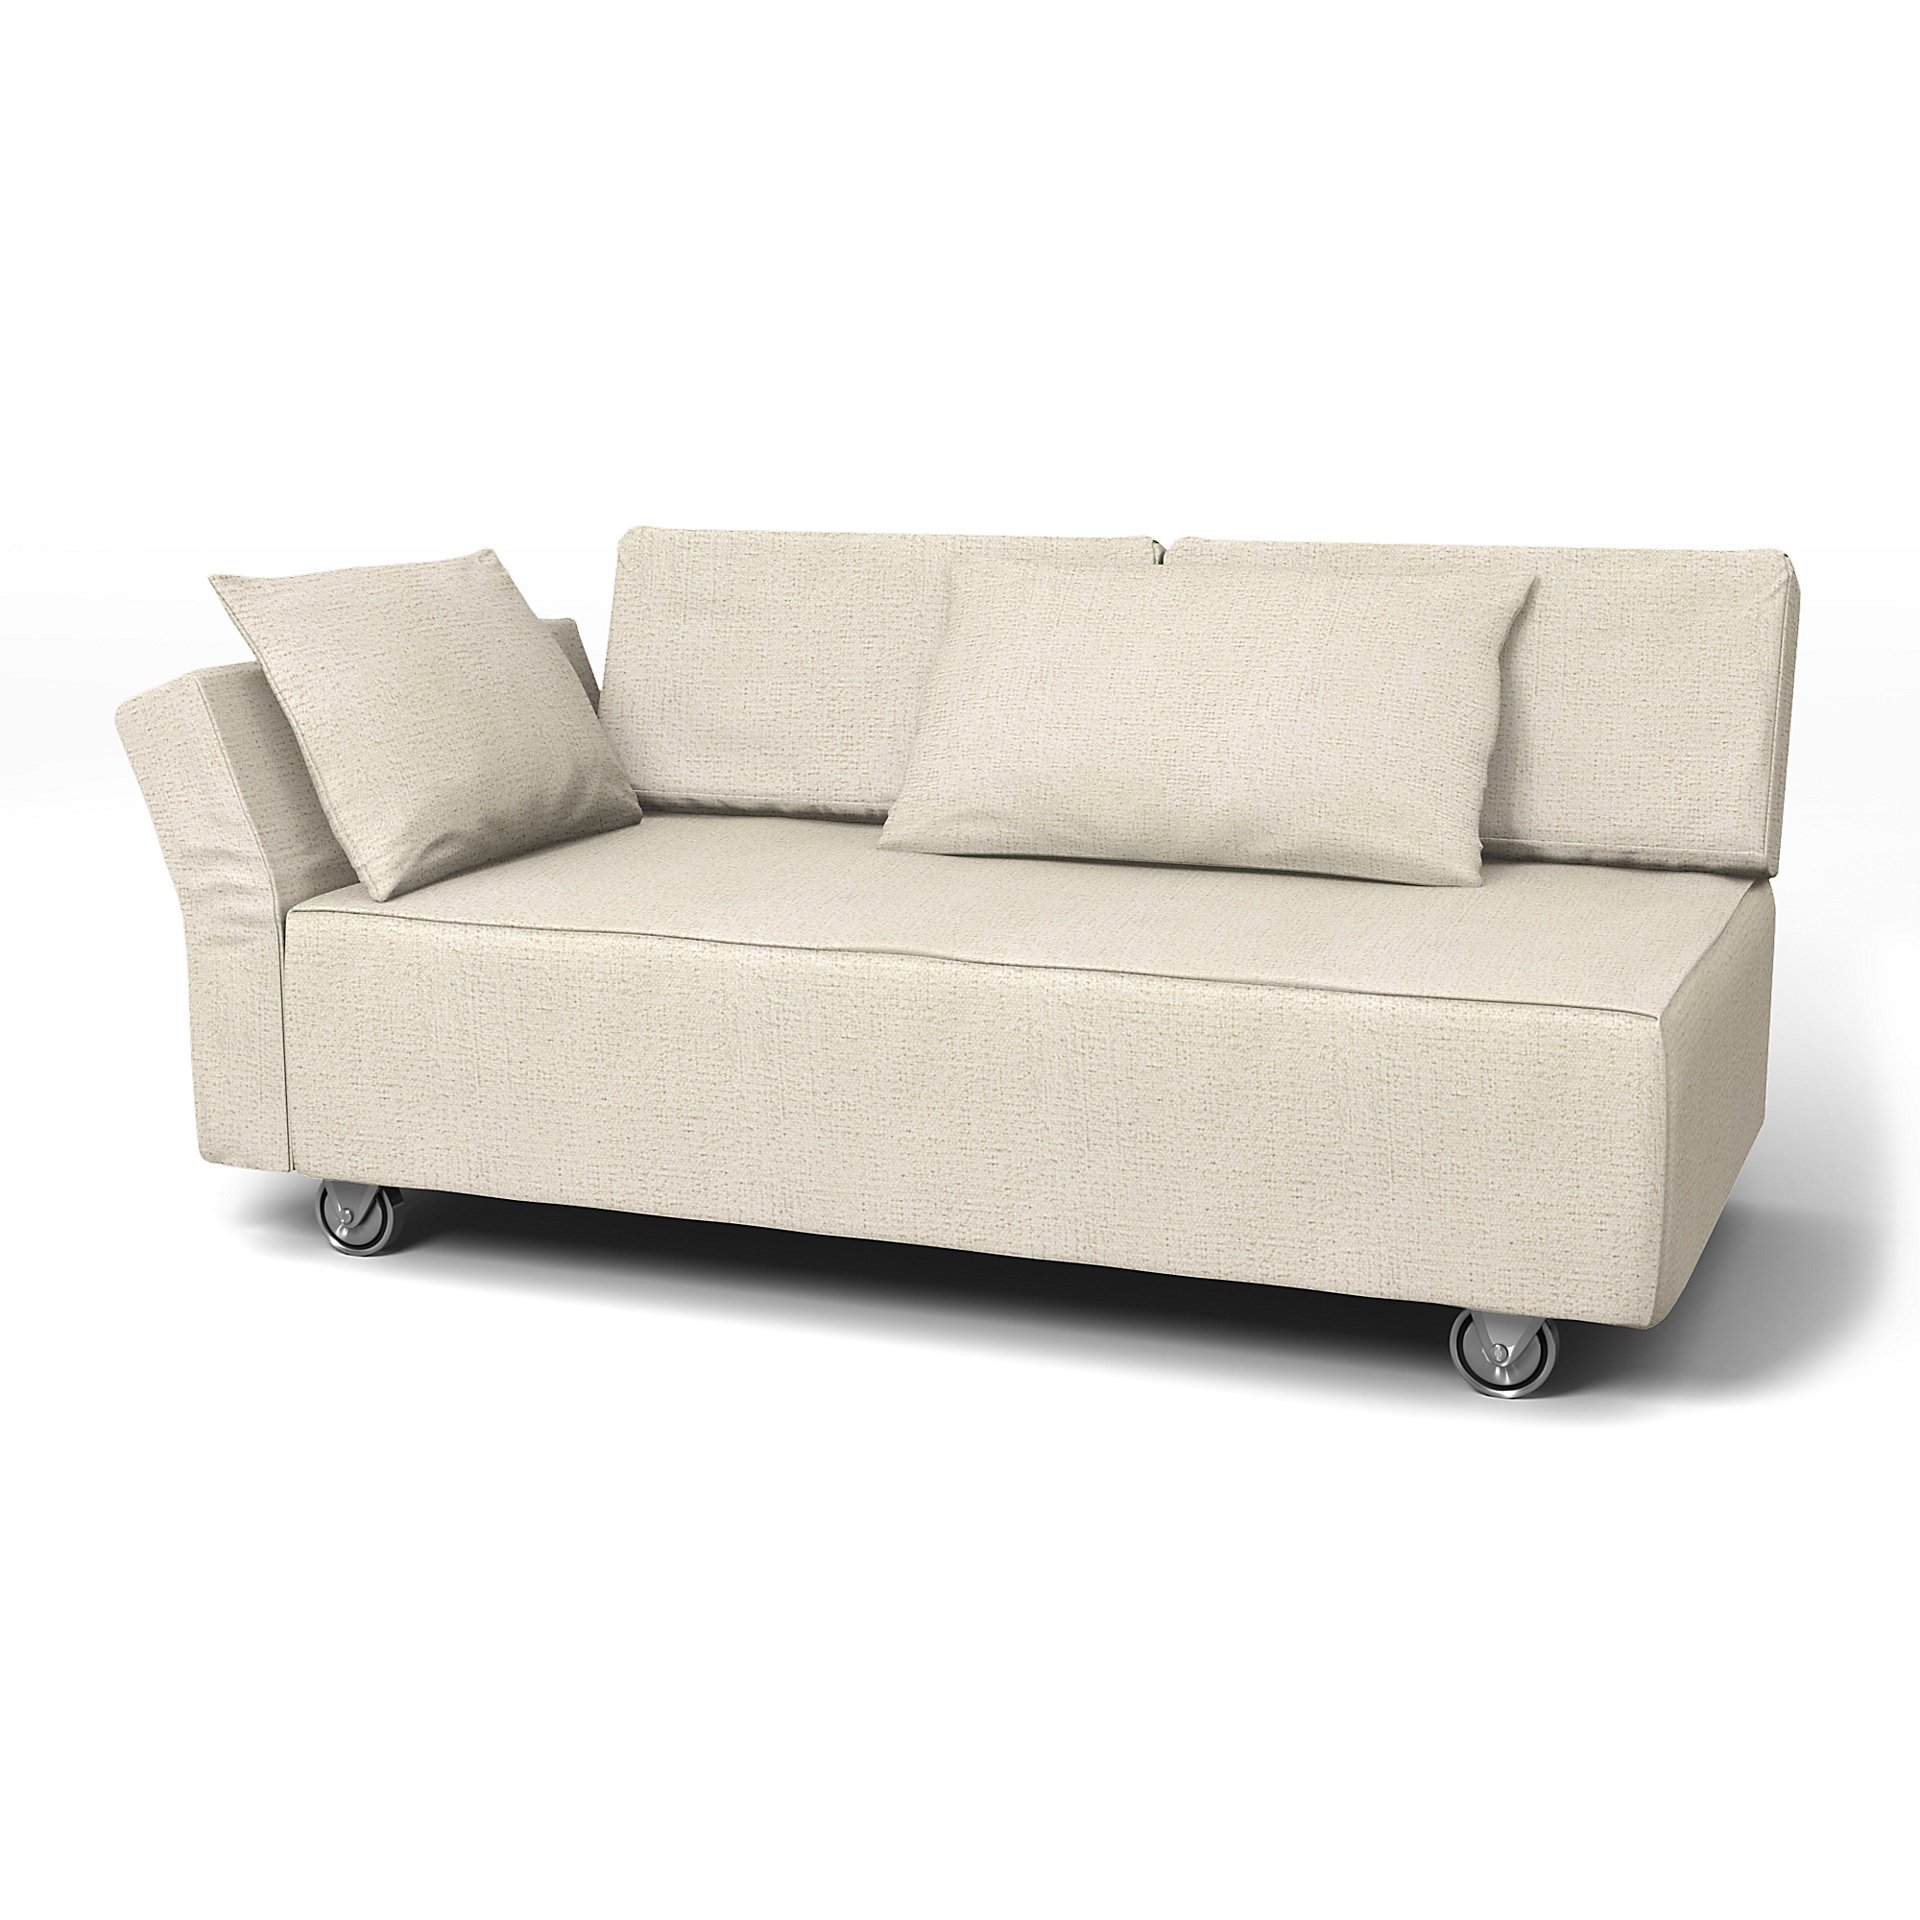 IKEA - Falsterbo 2 Seat Sofa with Left Arm Cover, Ecru, Boucle & Texture - Bemz